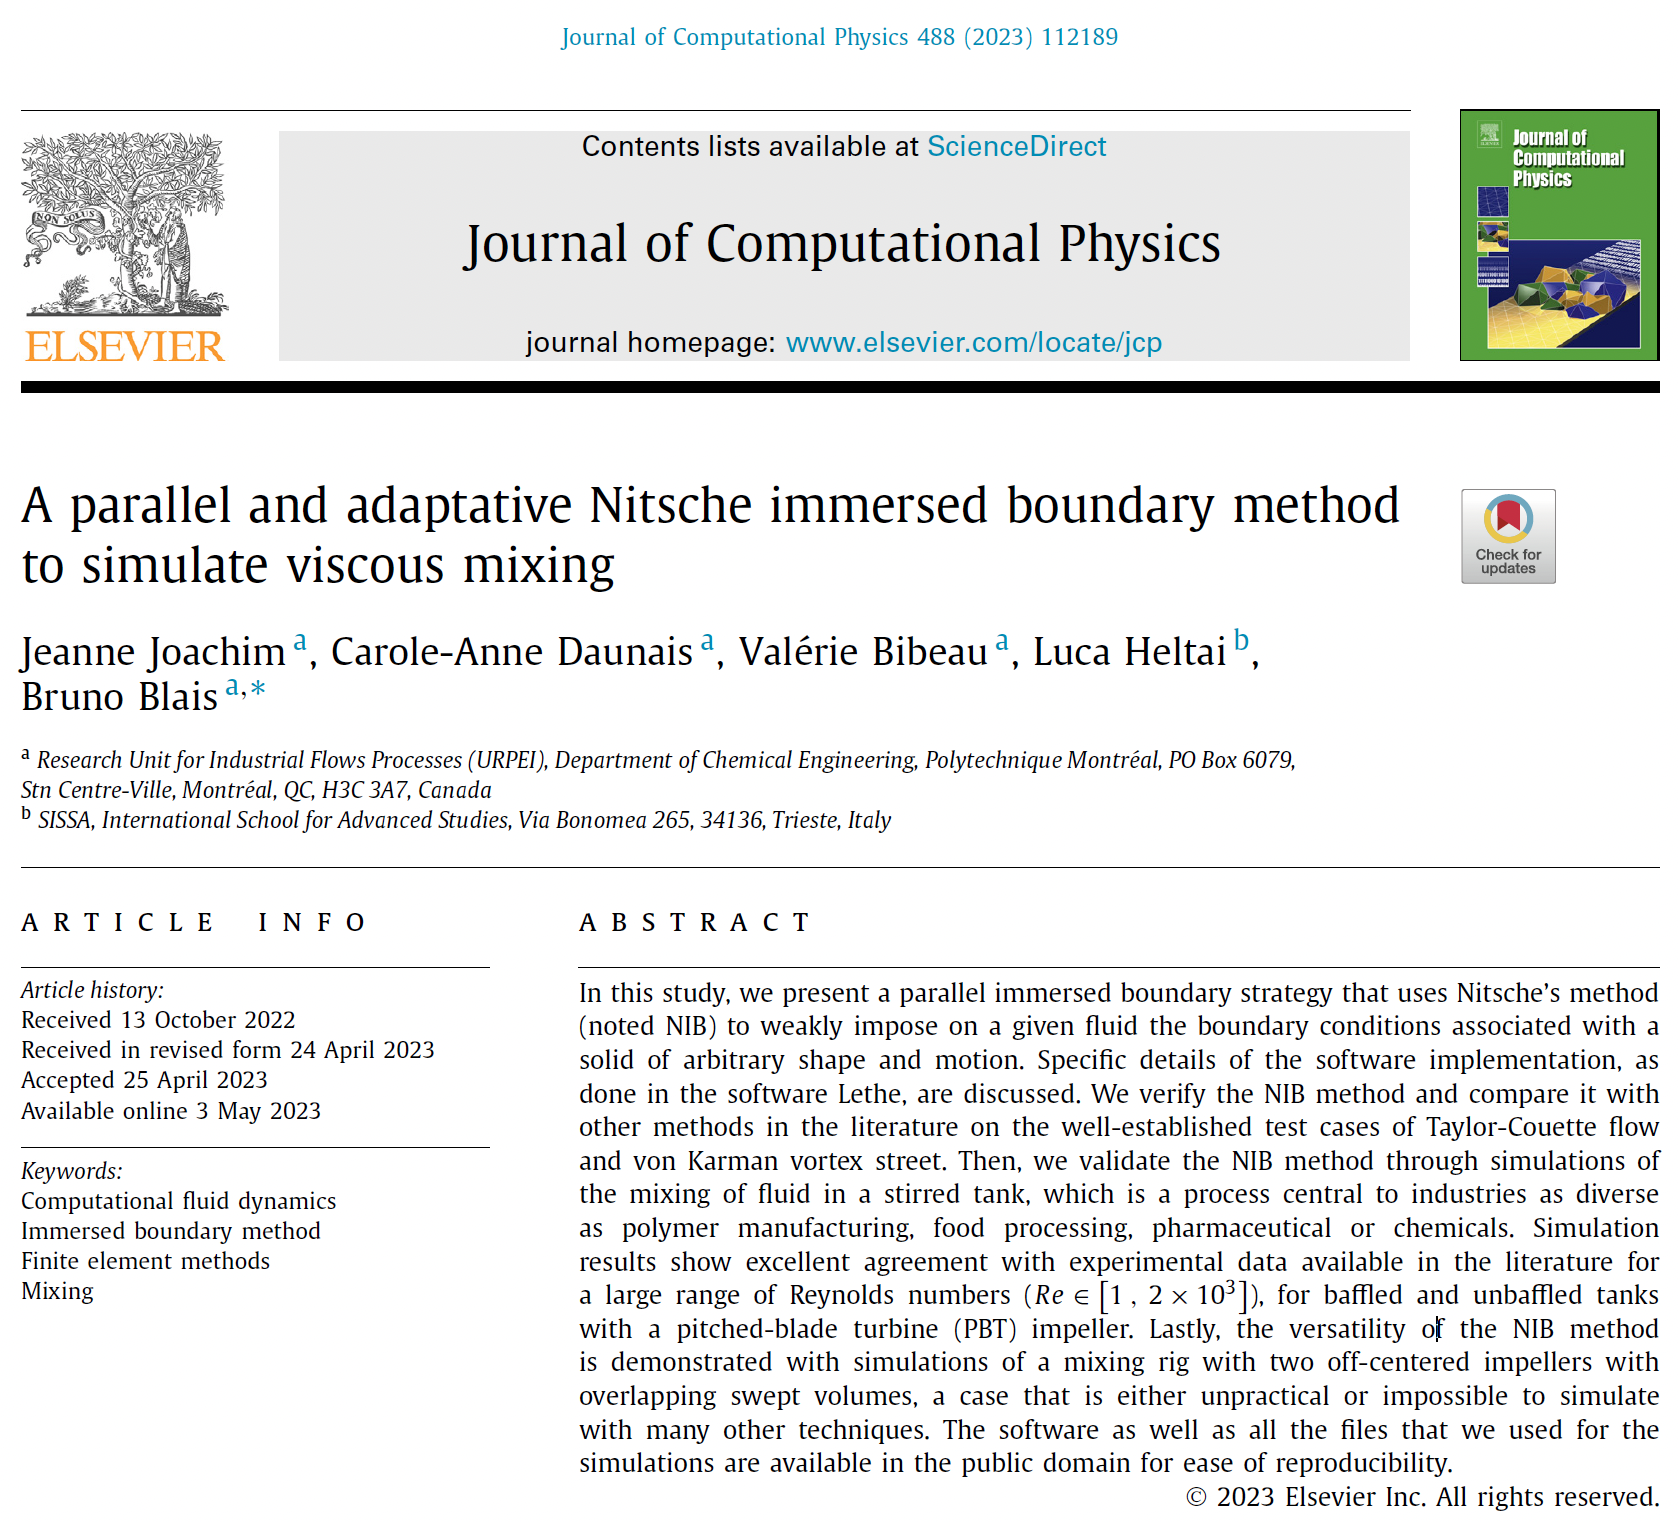 A parallel and adaptative Nitsche immersed boundary method to simulate viscous mixing